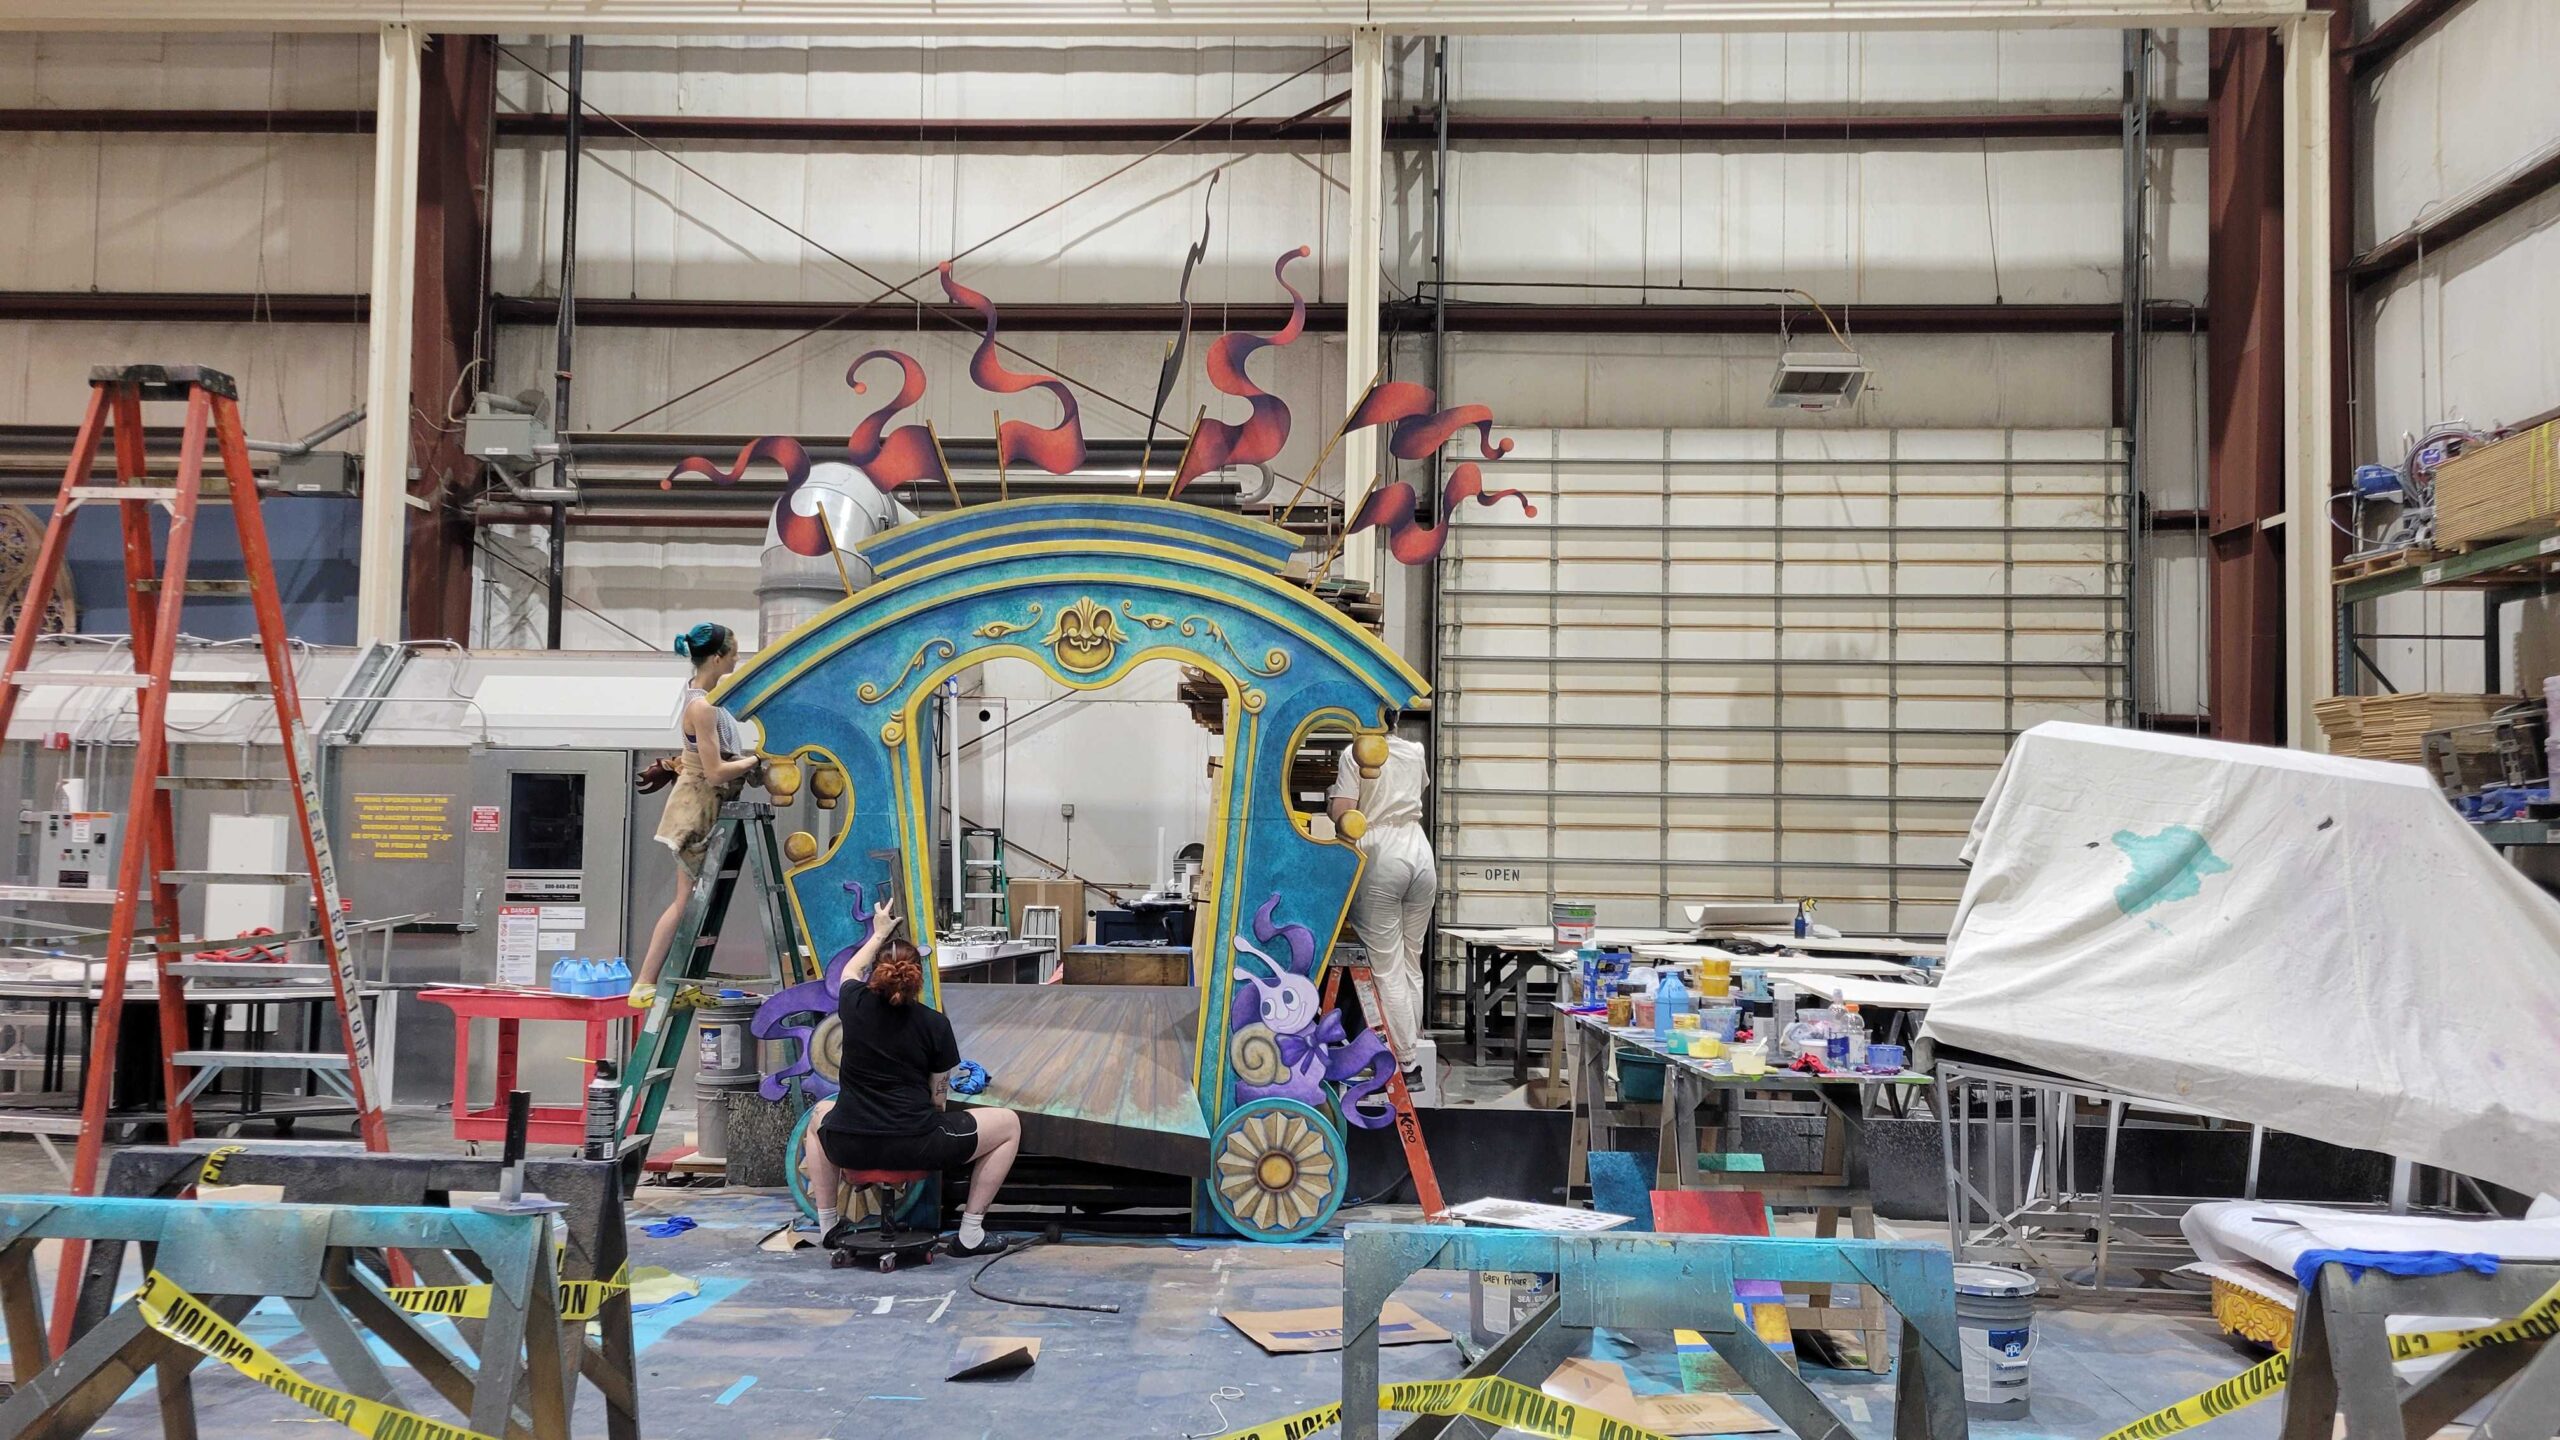 Backstage, stagehands and designers work on creating a large blue structure with pink decorative accents